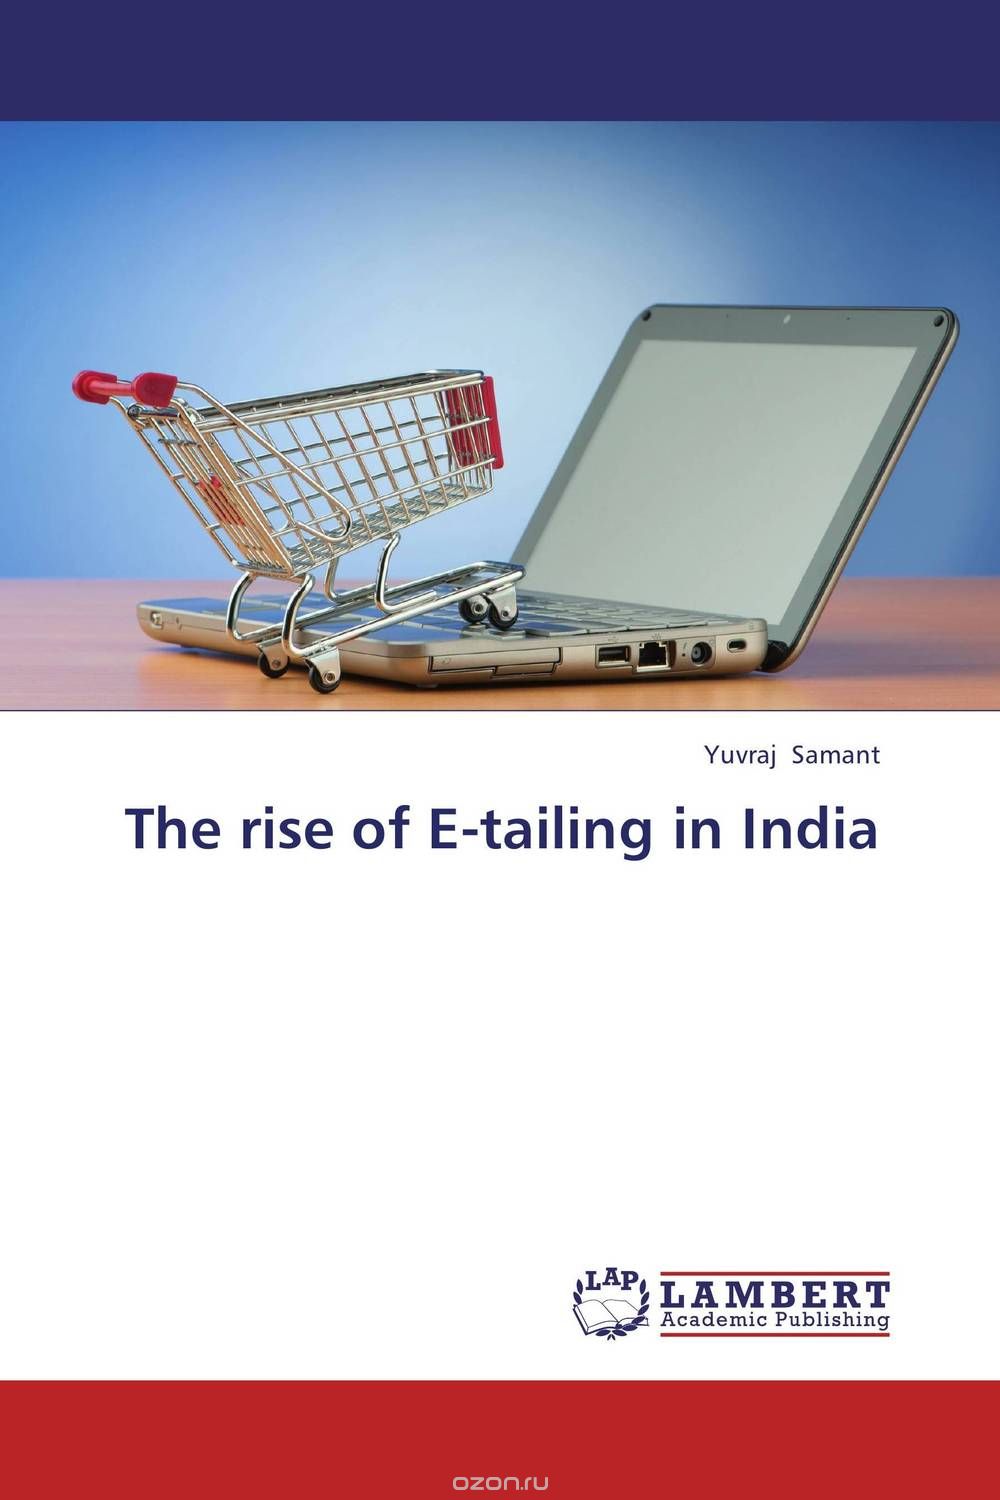 The rise of E-tailing in India